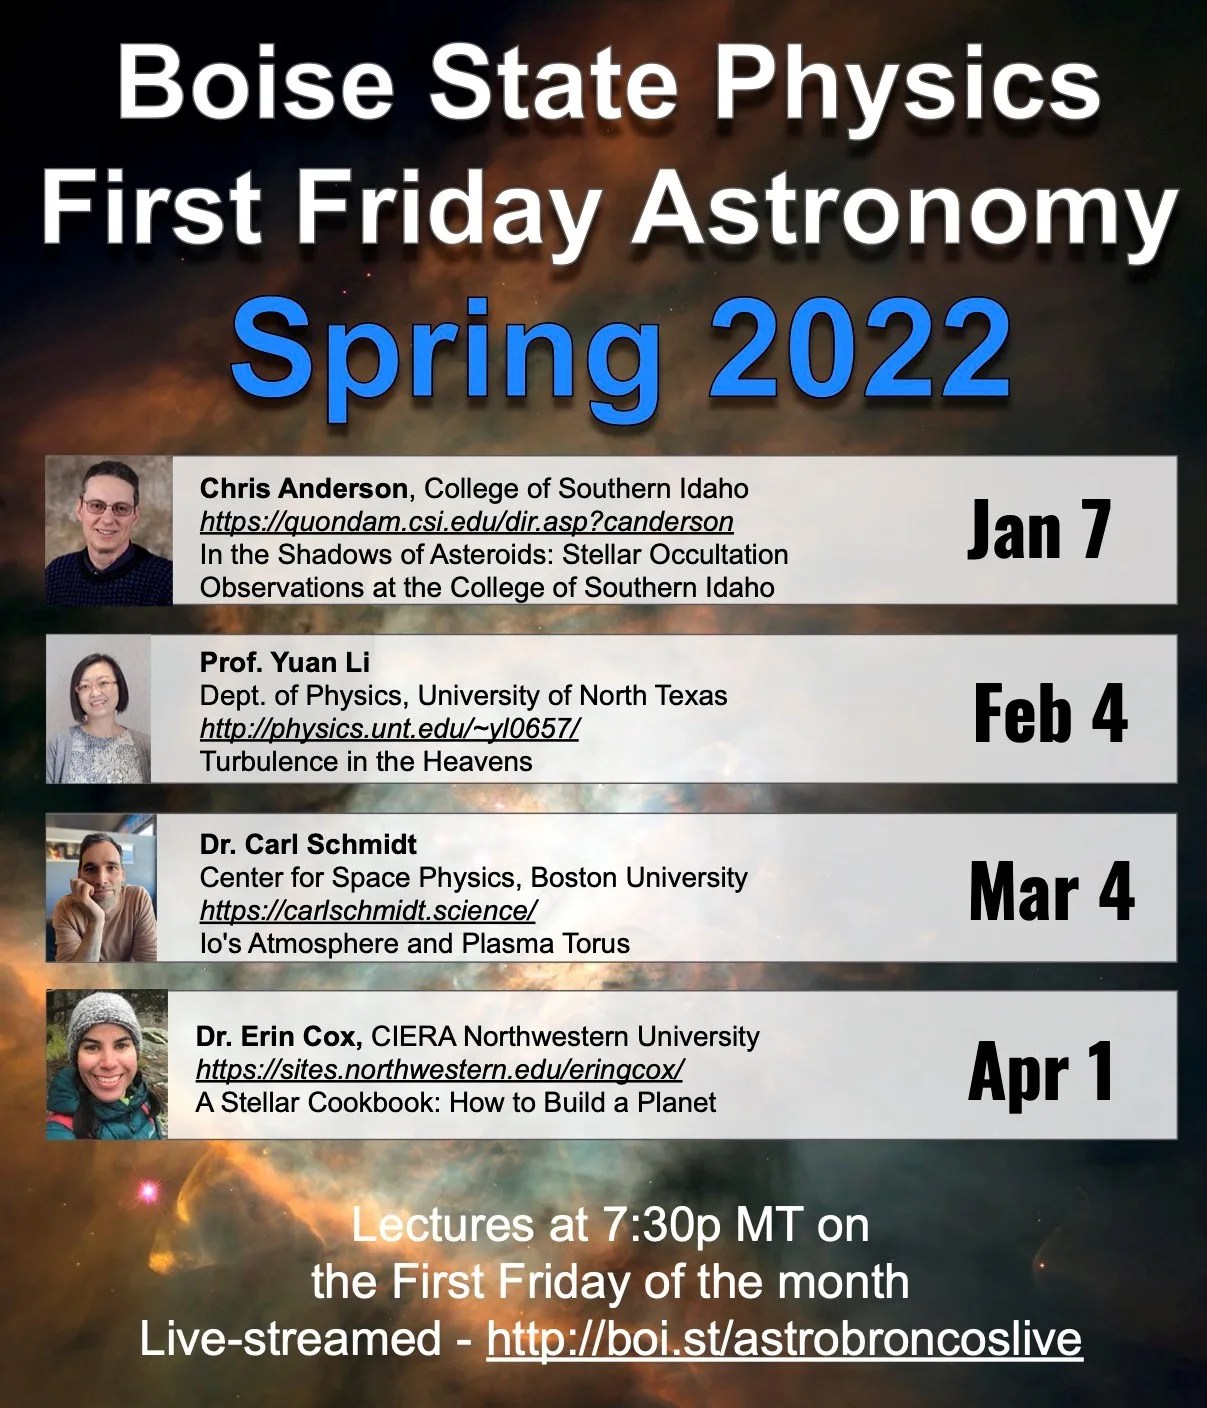 Spring 2022 First Friday Astronomy flyer